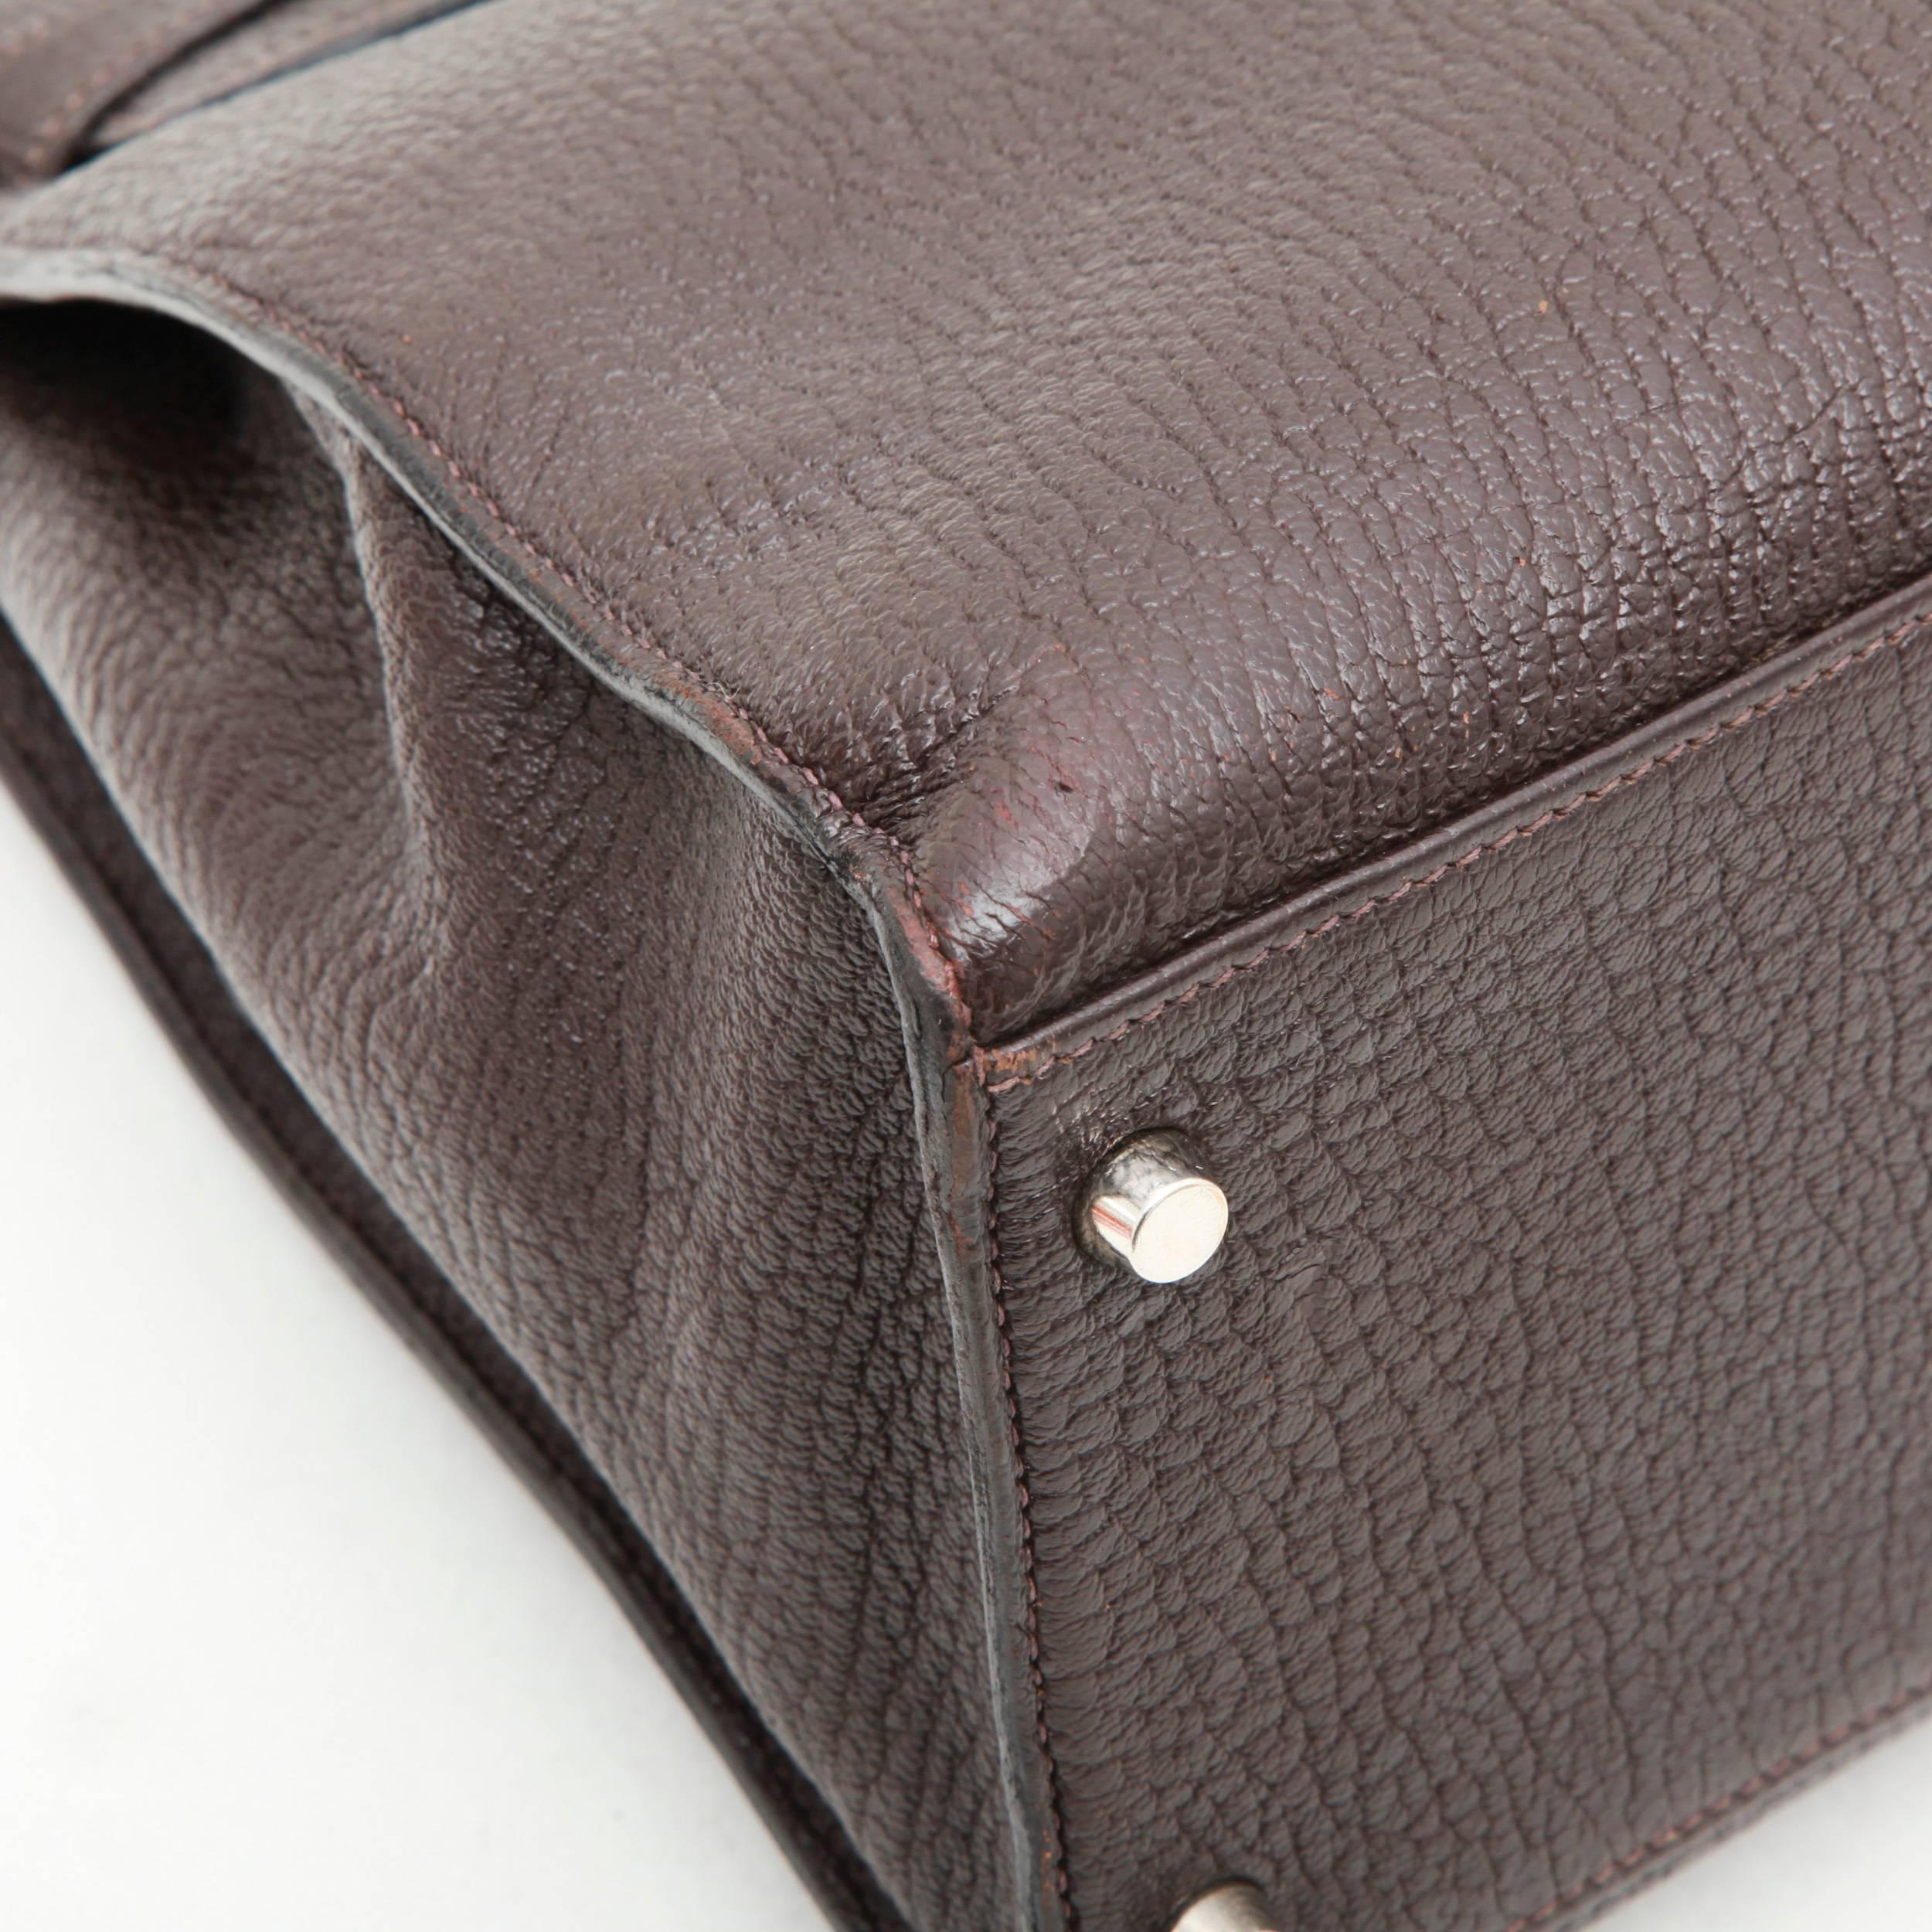 Hermes Kelly II 35 in Brown Grained Leather with Saddle Stitching 4